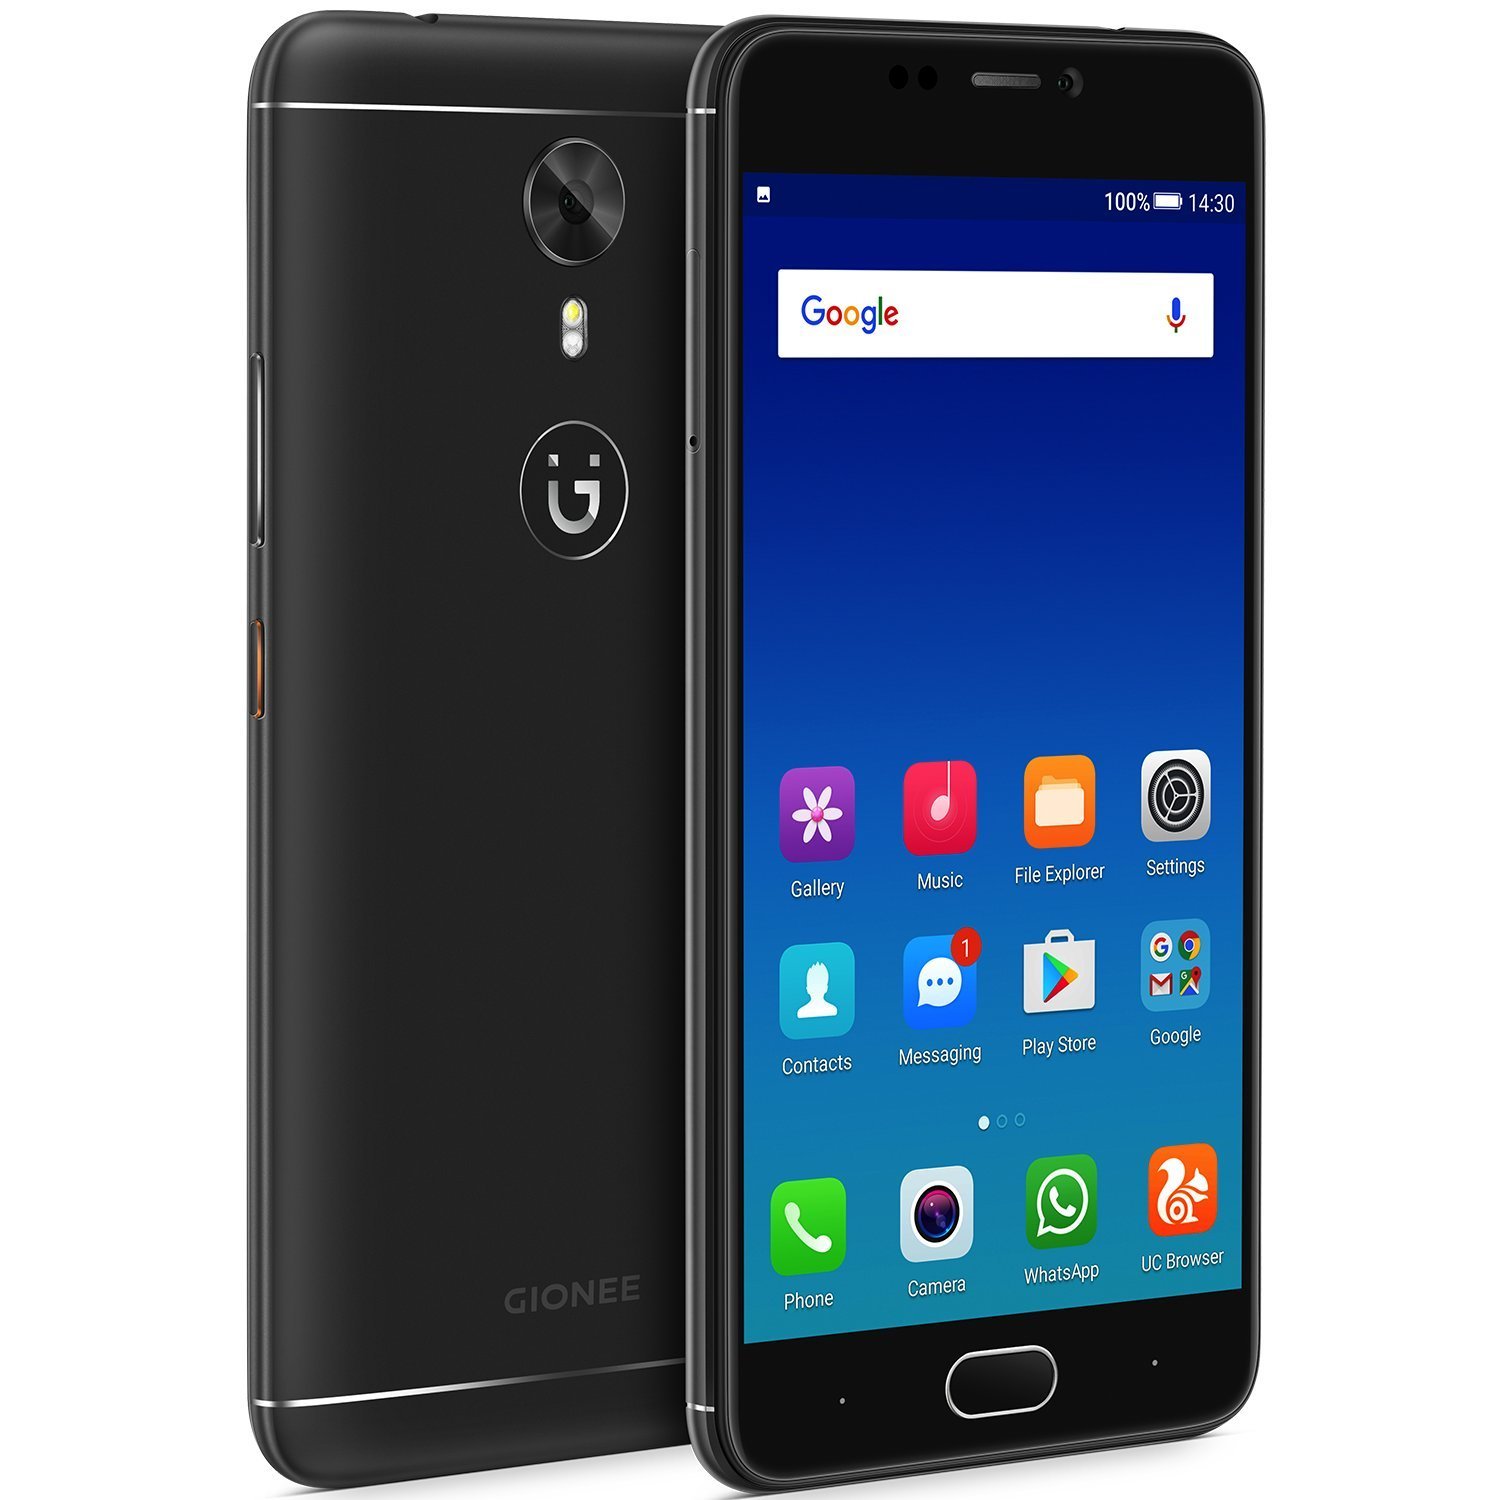 Gionee A1 price in India